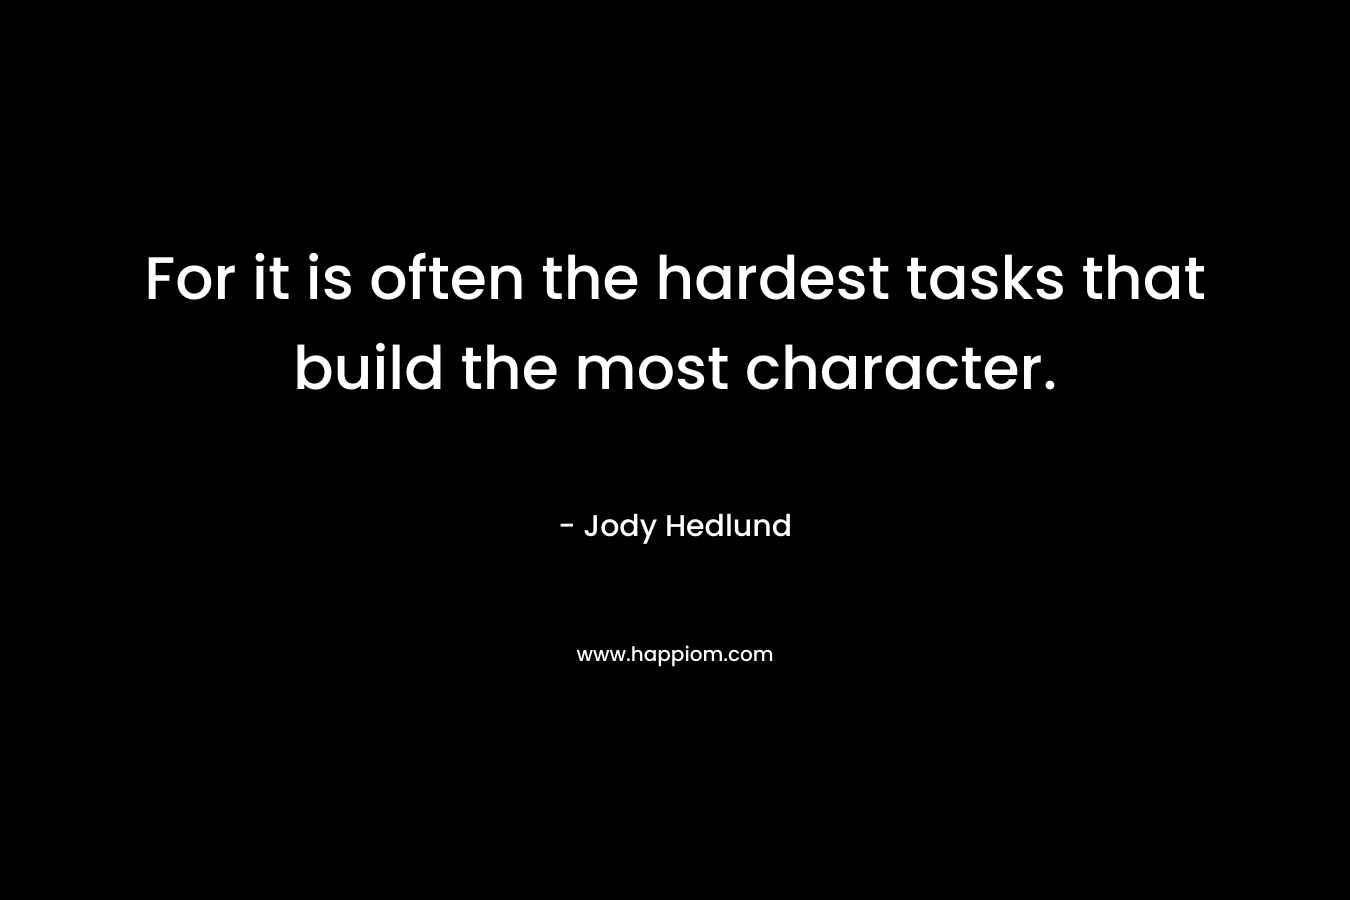 For it is often the hardest tasks that build the most character. – Jody Hedlund